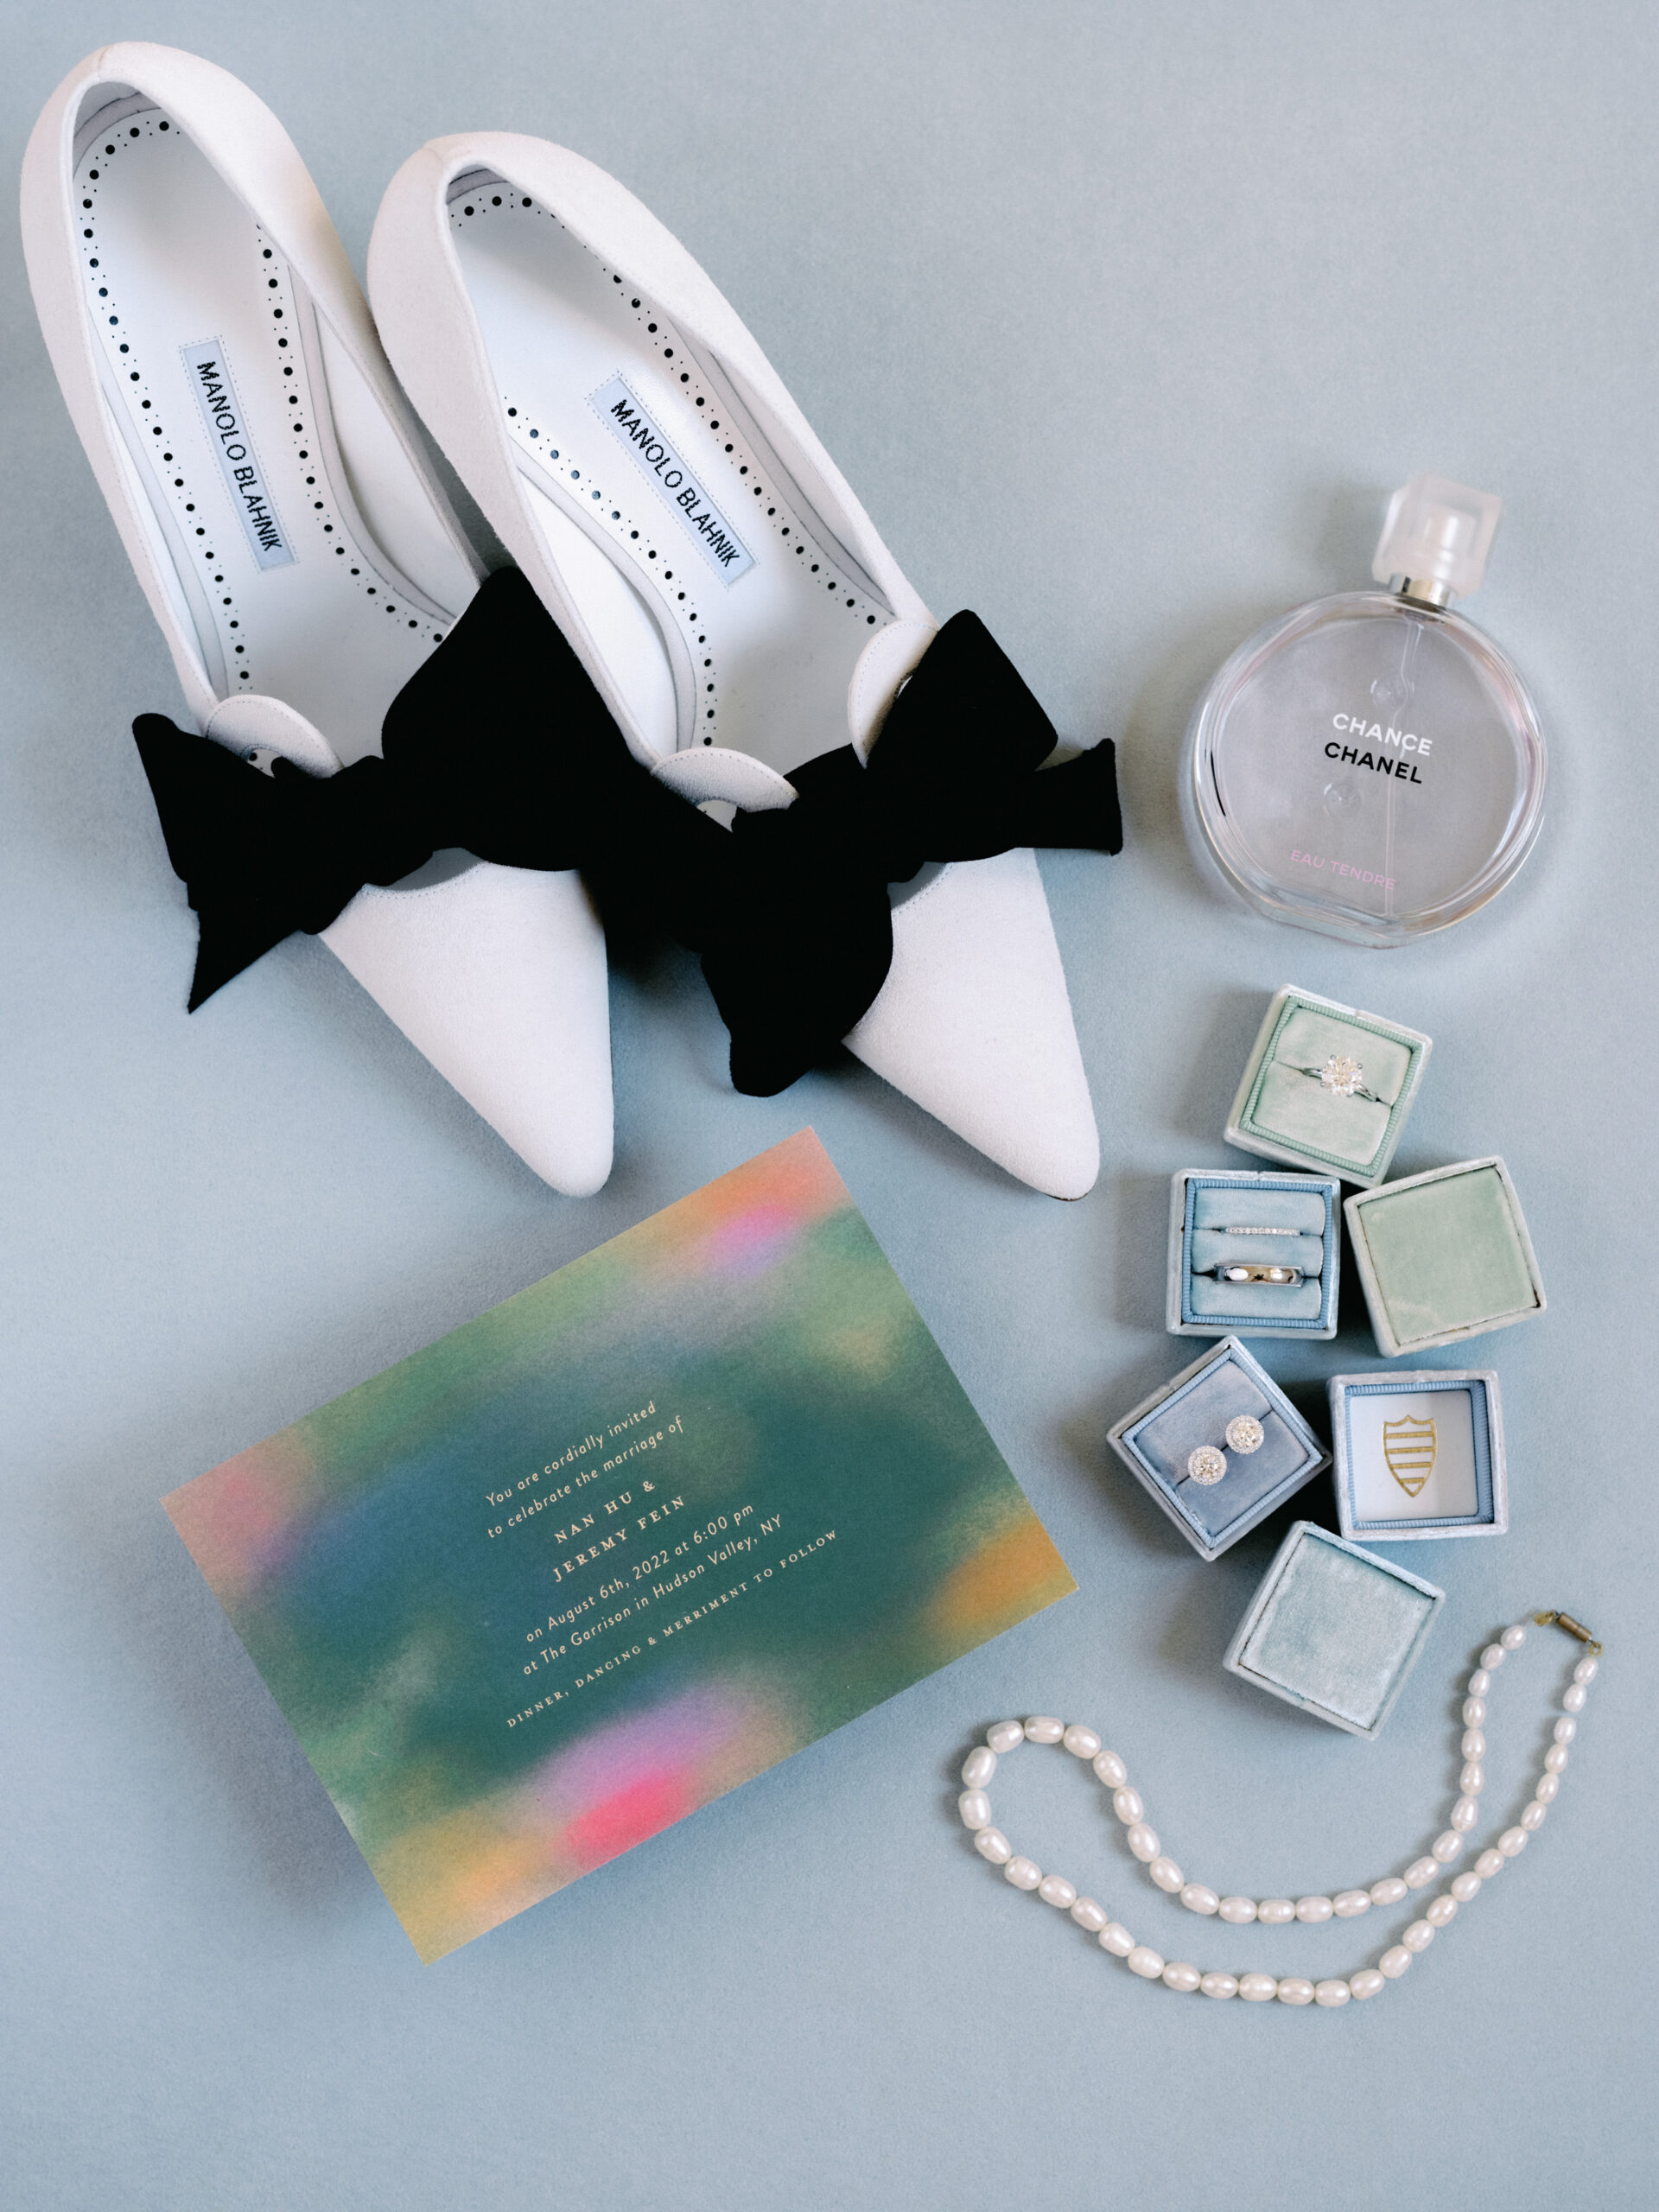 Bride's shoes, accessories and invitation. Wedding Personal style image by Jenny Fu Studio